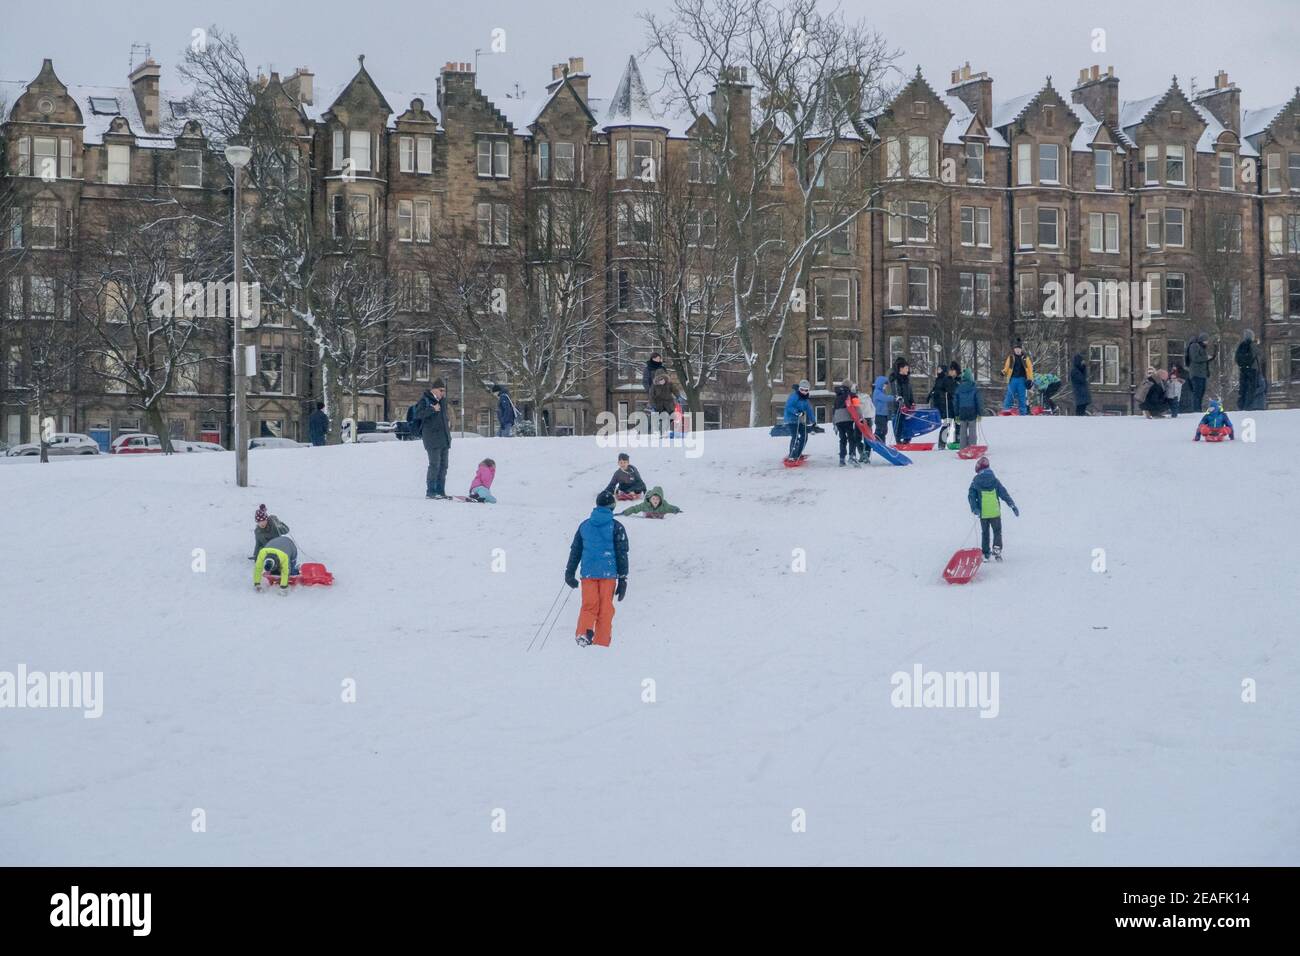 Children playing in the snow with sledges at the Edinburgh meadows in front of tenement building Stock Photo